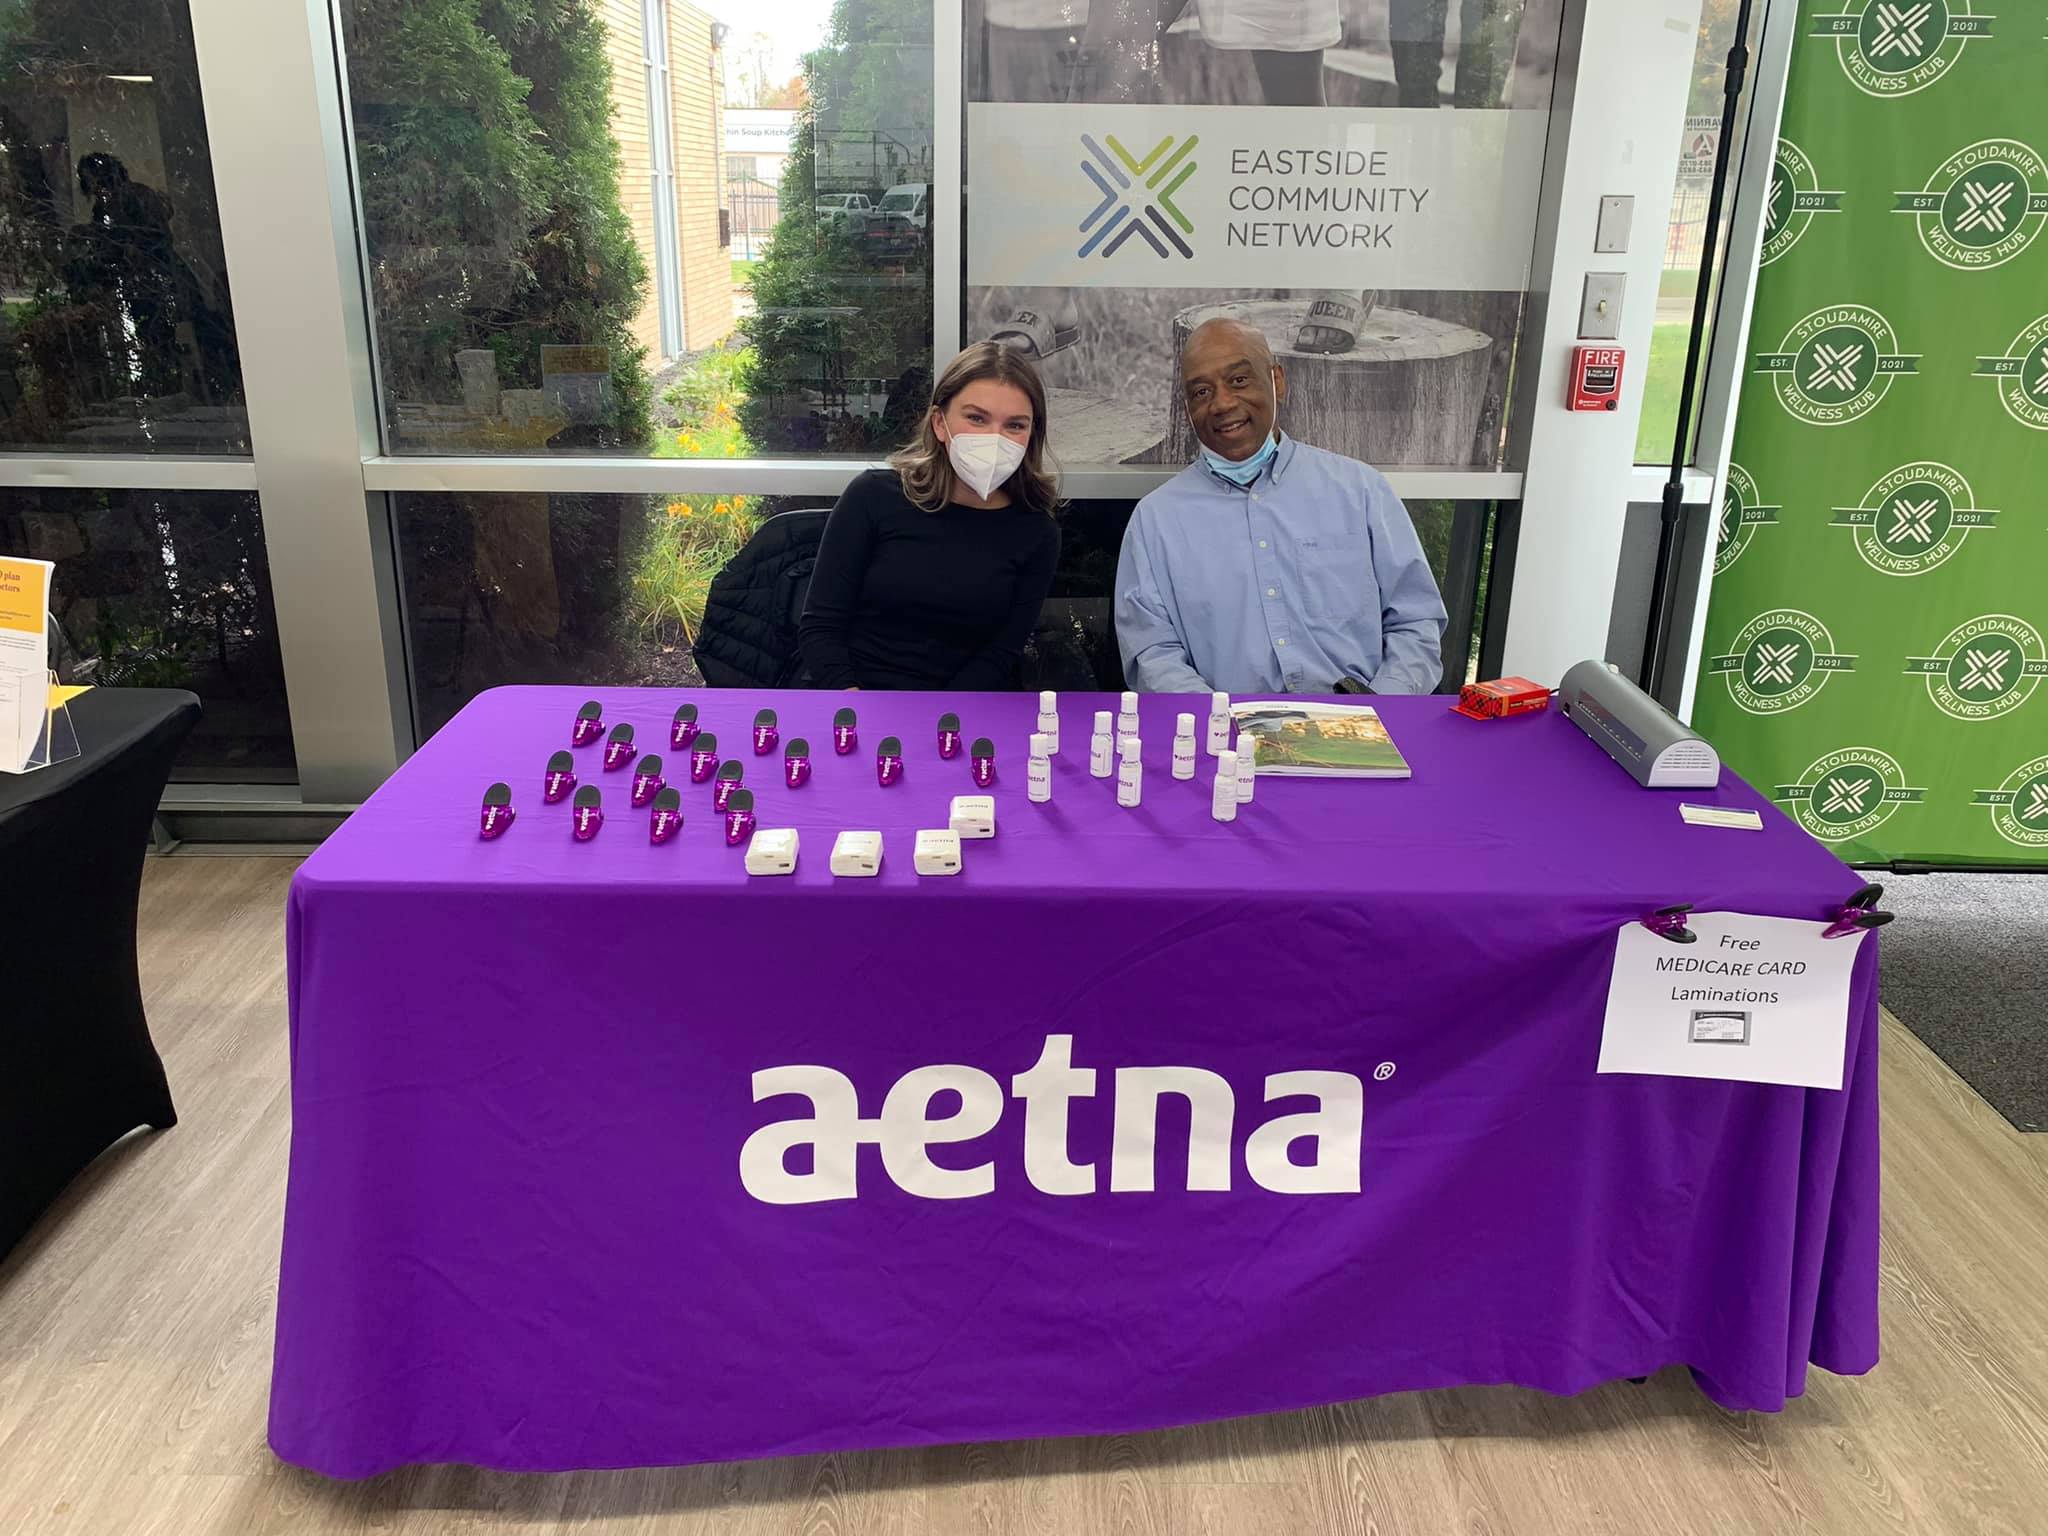 Two adults sit at an "Aetna" volunteer table 